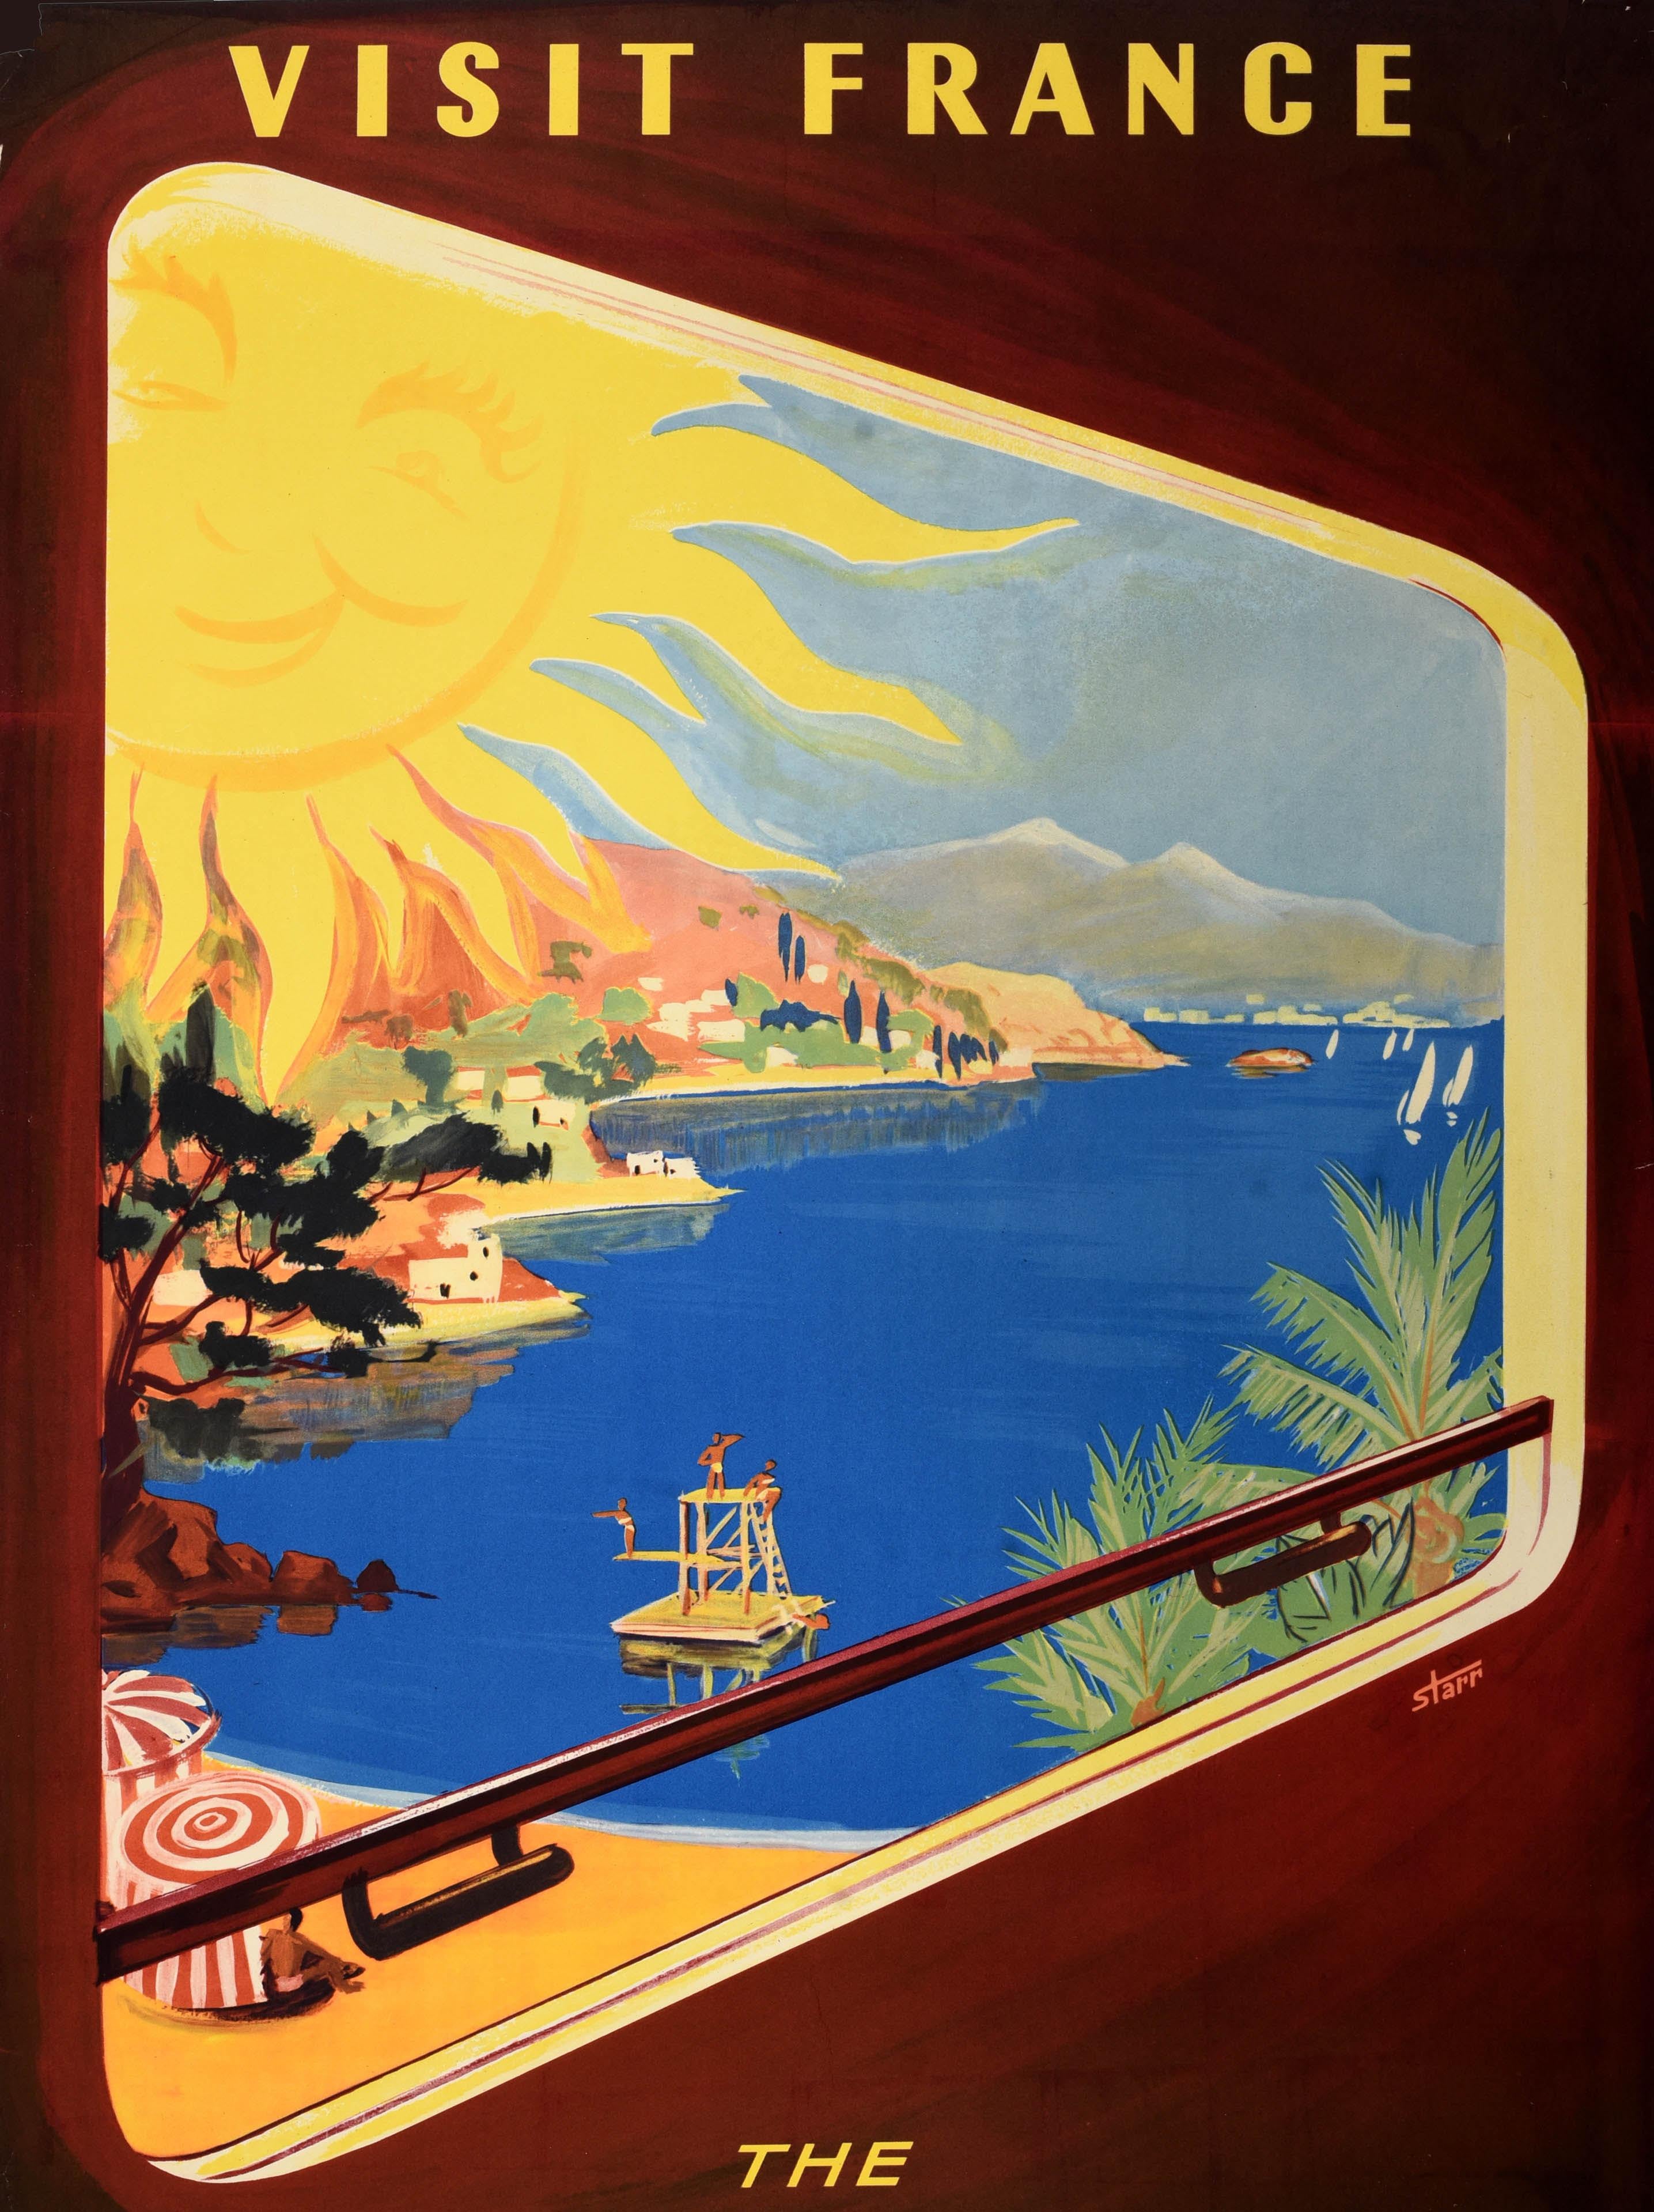 Original Vintage Travel Poster French Riviera SNCF Visit France Starr Midcentury In Good Condition For Sale In London, GB